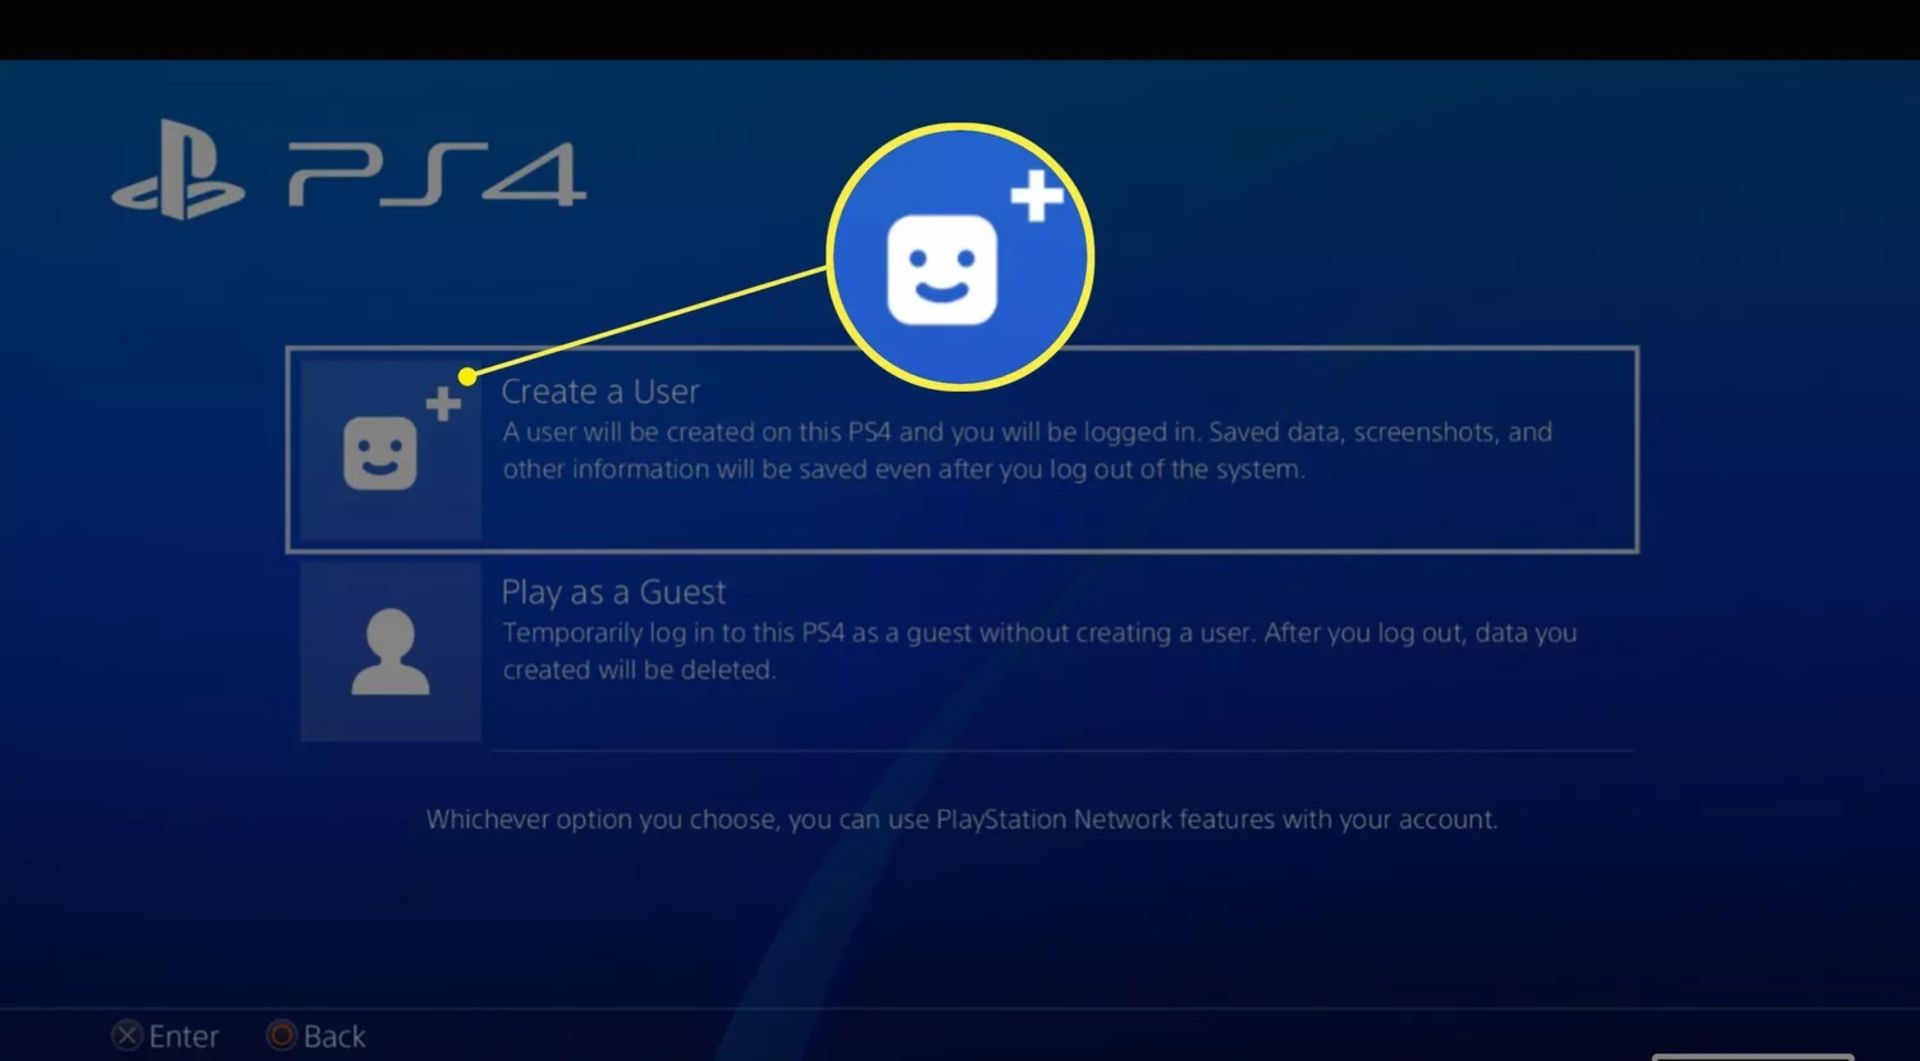 ps4 new user